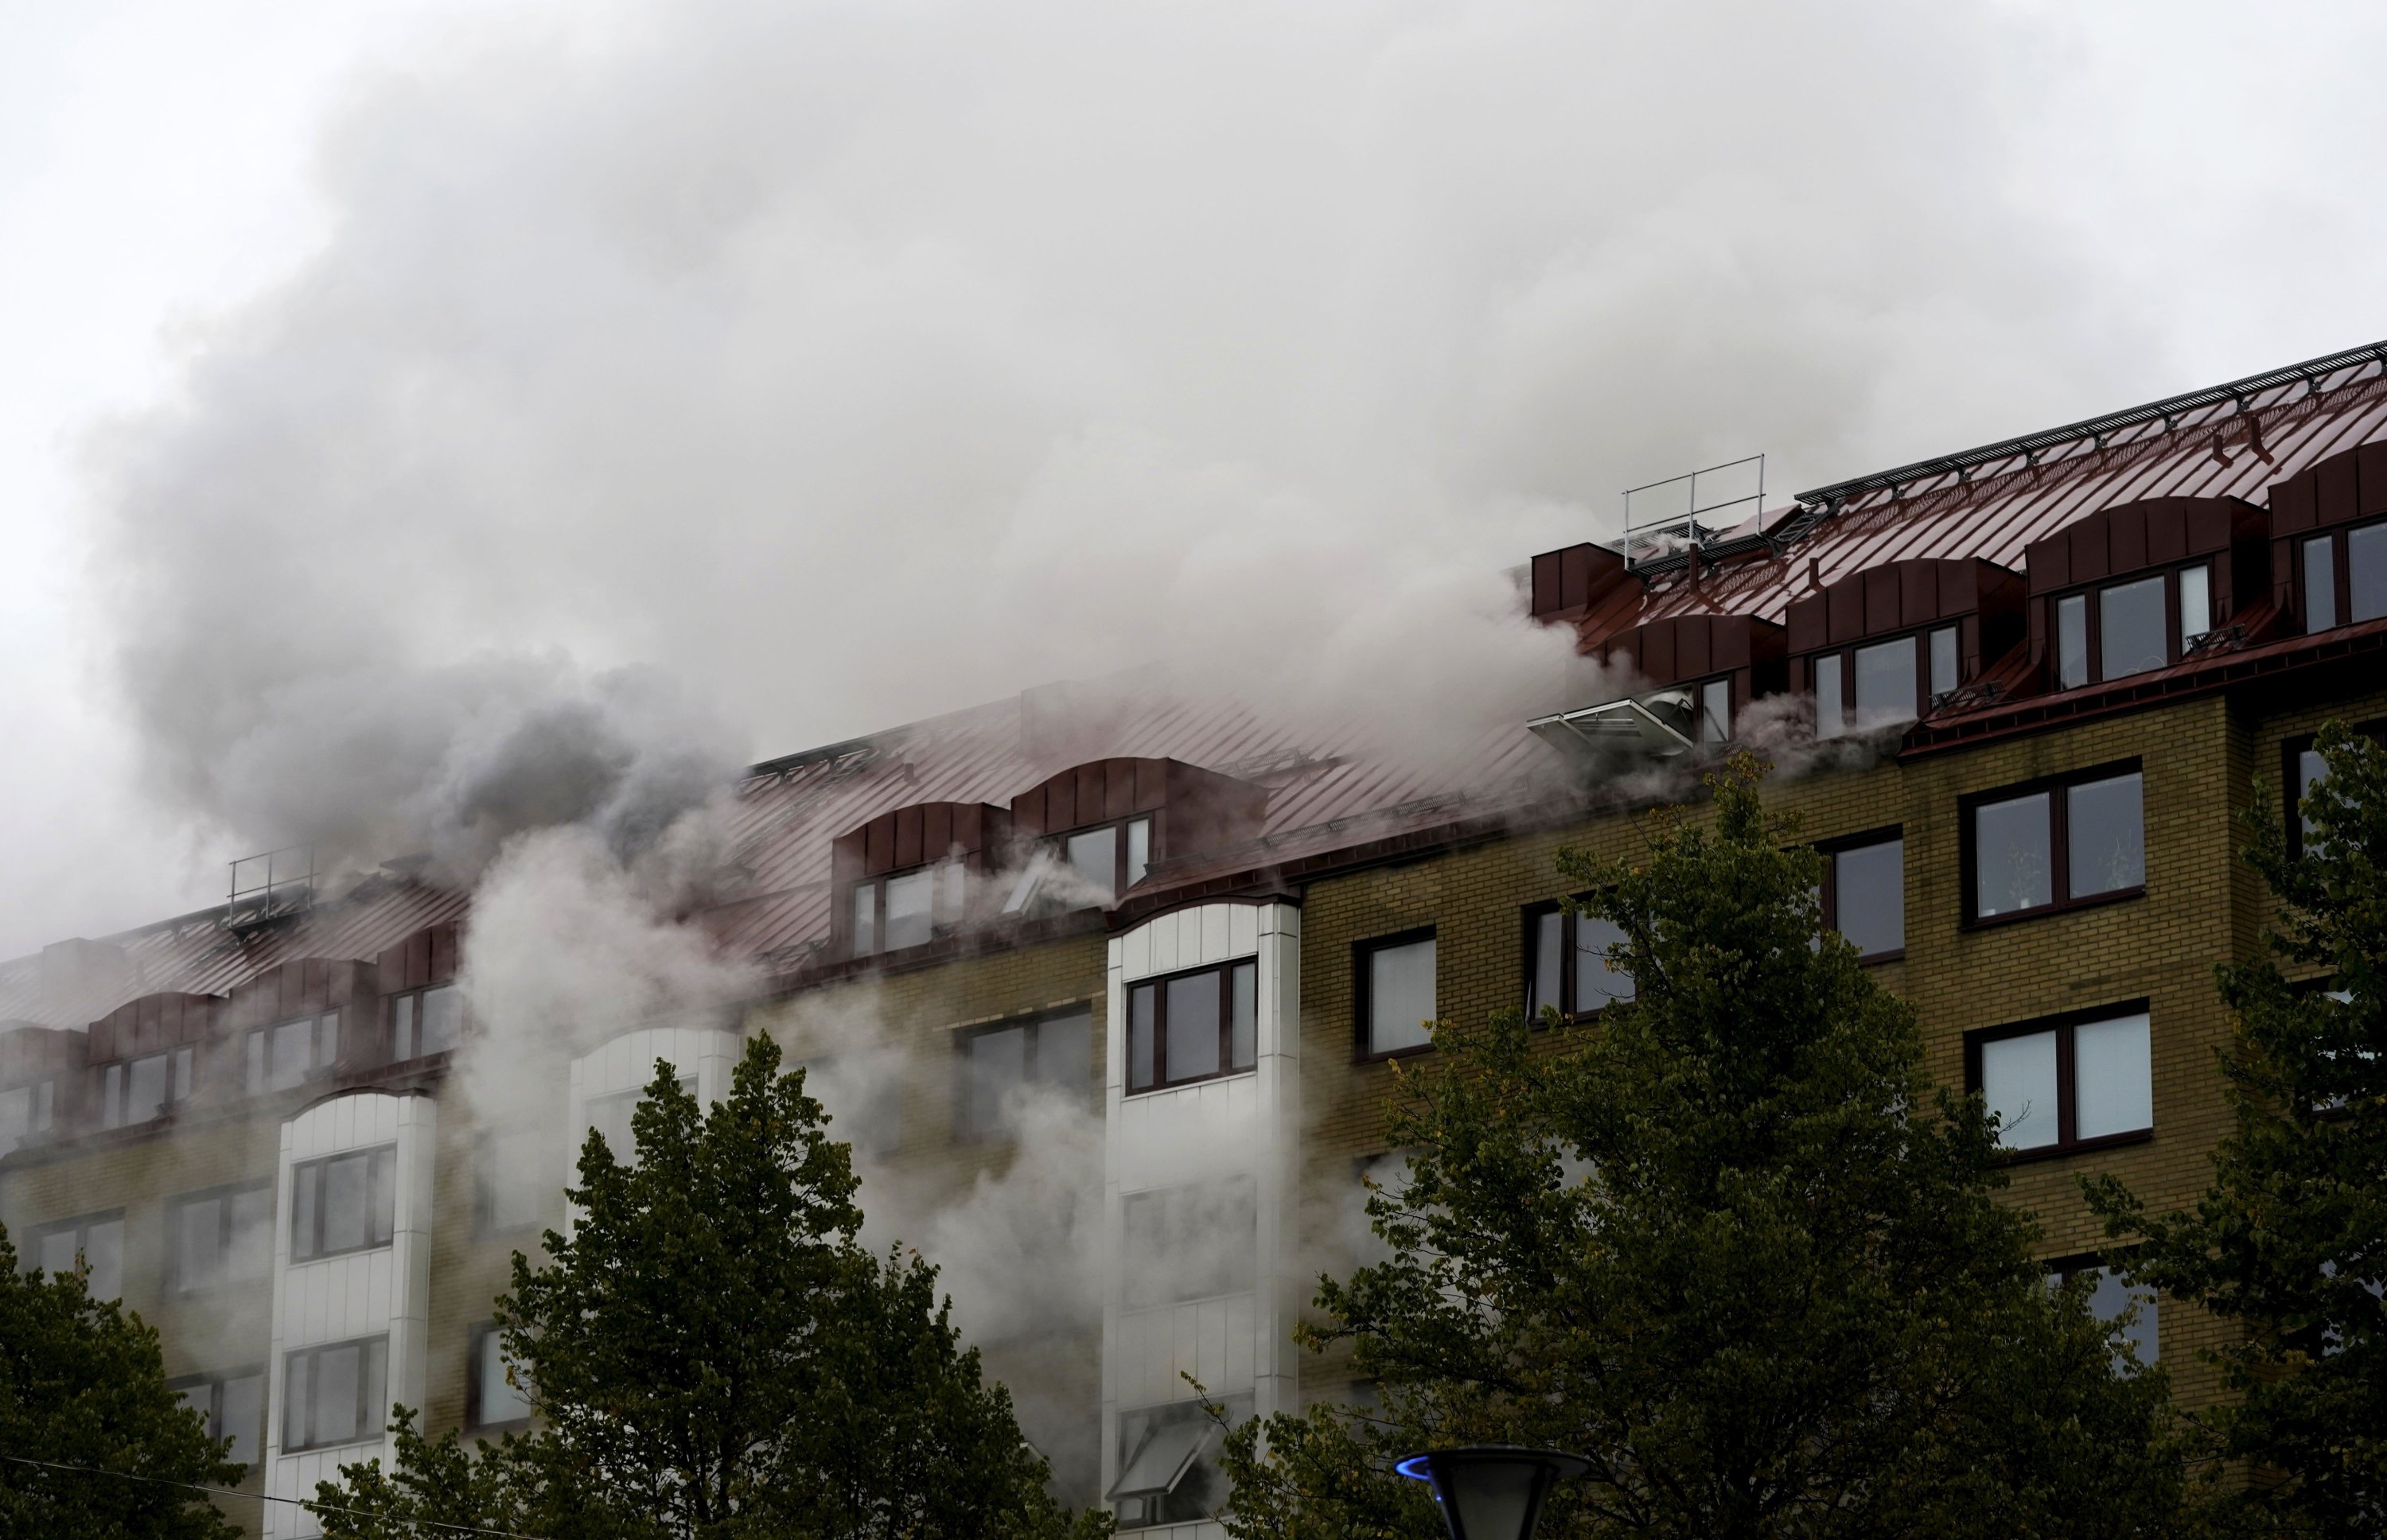 Smoke billows from an apartment building after an explosion in Annedal, central Gothenburg, Sweden, Sept. 28, 2021. (AP Photo)